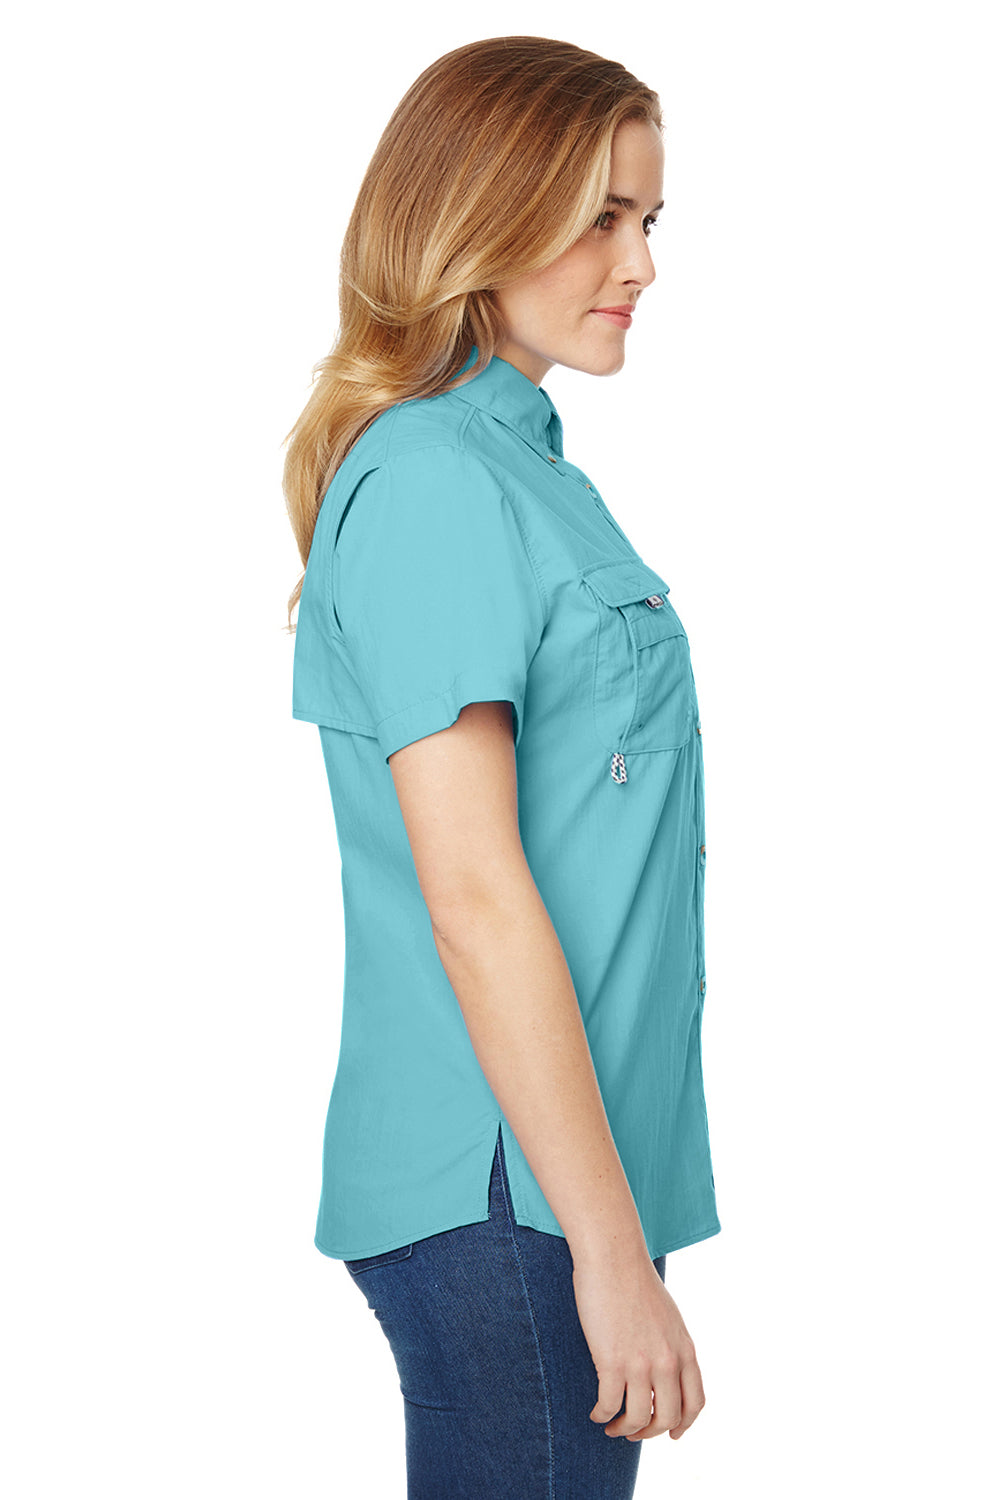 Columbia 7313 Womens Bahama Moisture Wicking Short Sleeve Button Down Shirt w/ Double Pockets Clear Blue Side